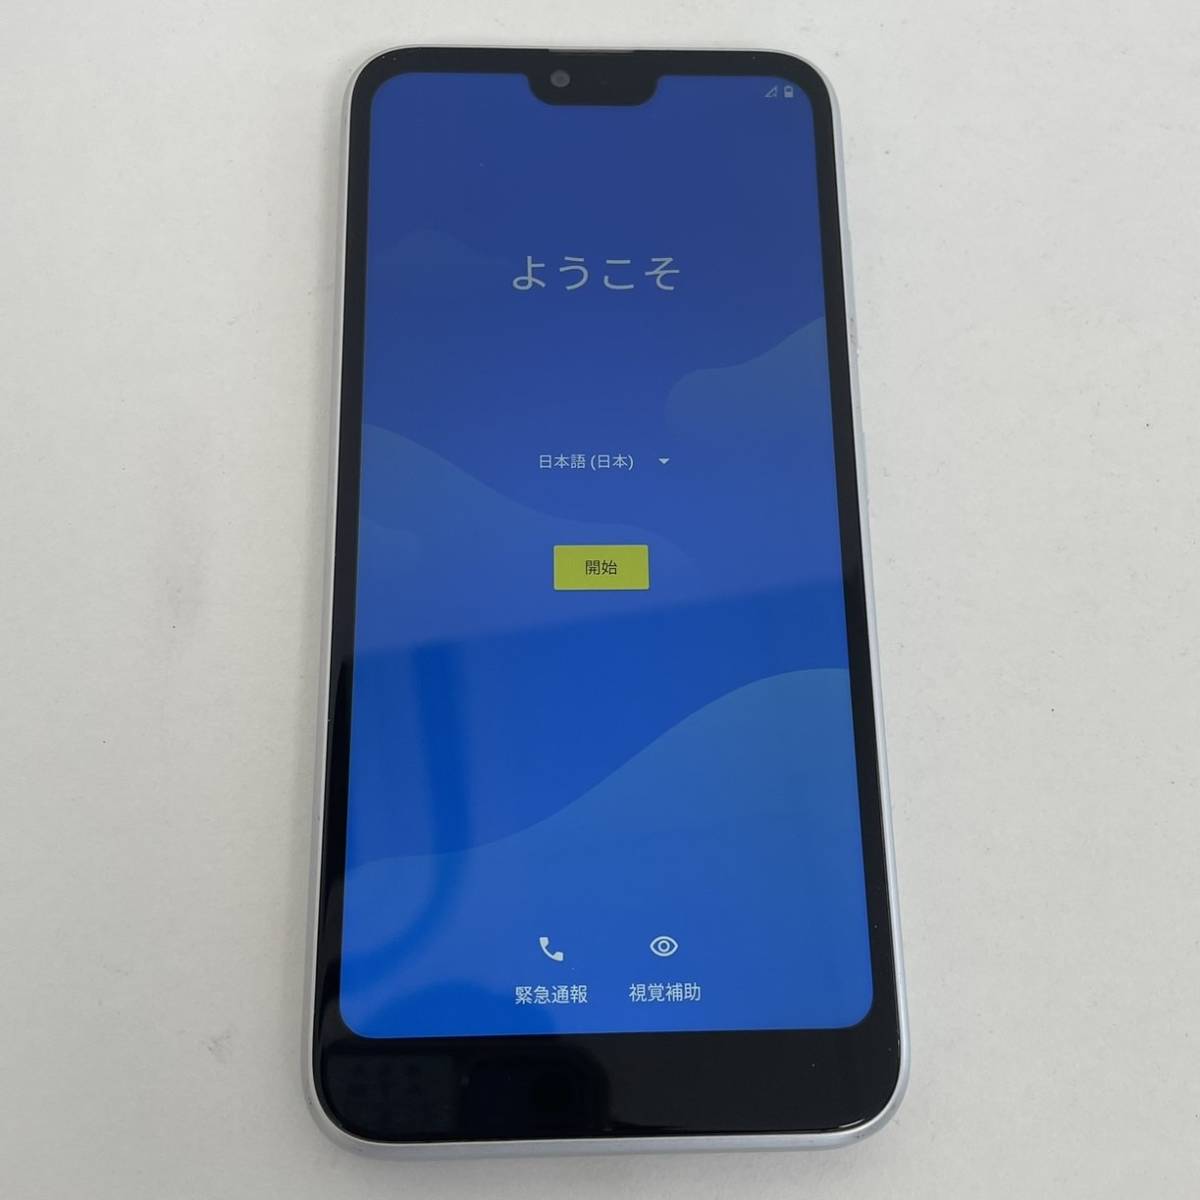 【KYOCERA/京セラ】S6-KC android one Y!mobile スマホ 本体のみ ホワイト 初期化済み 中古★4731